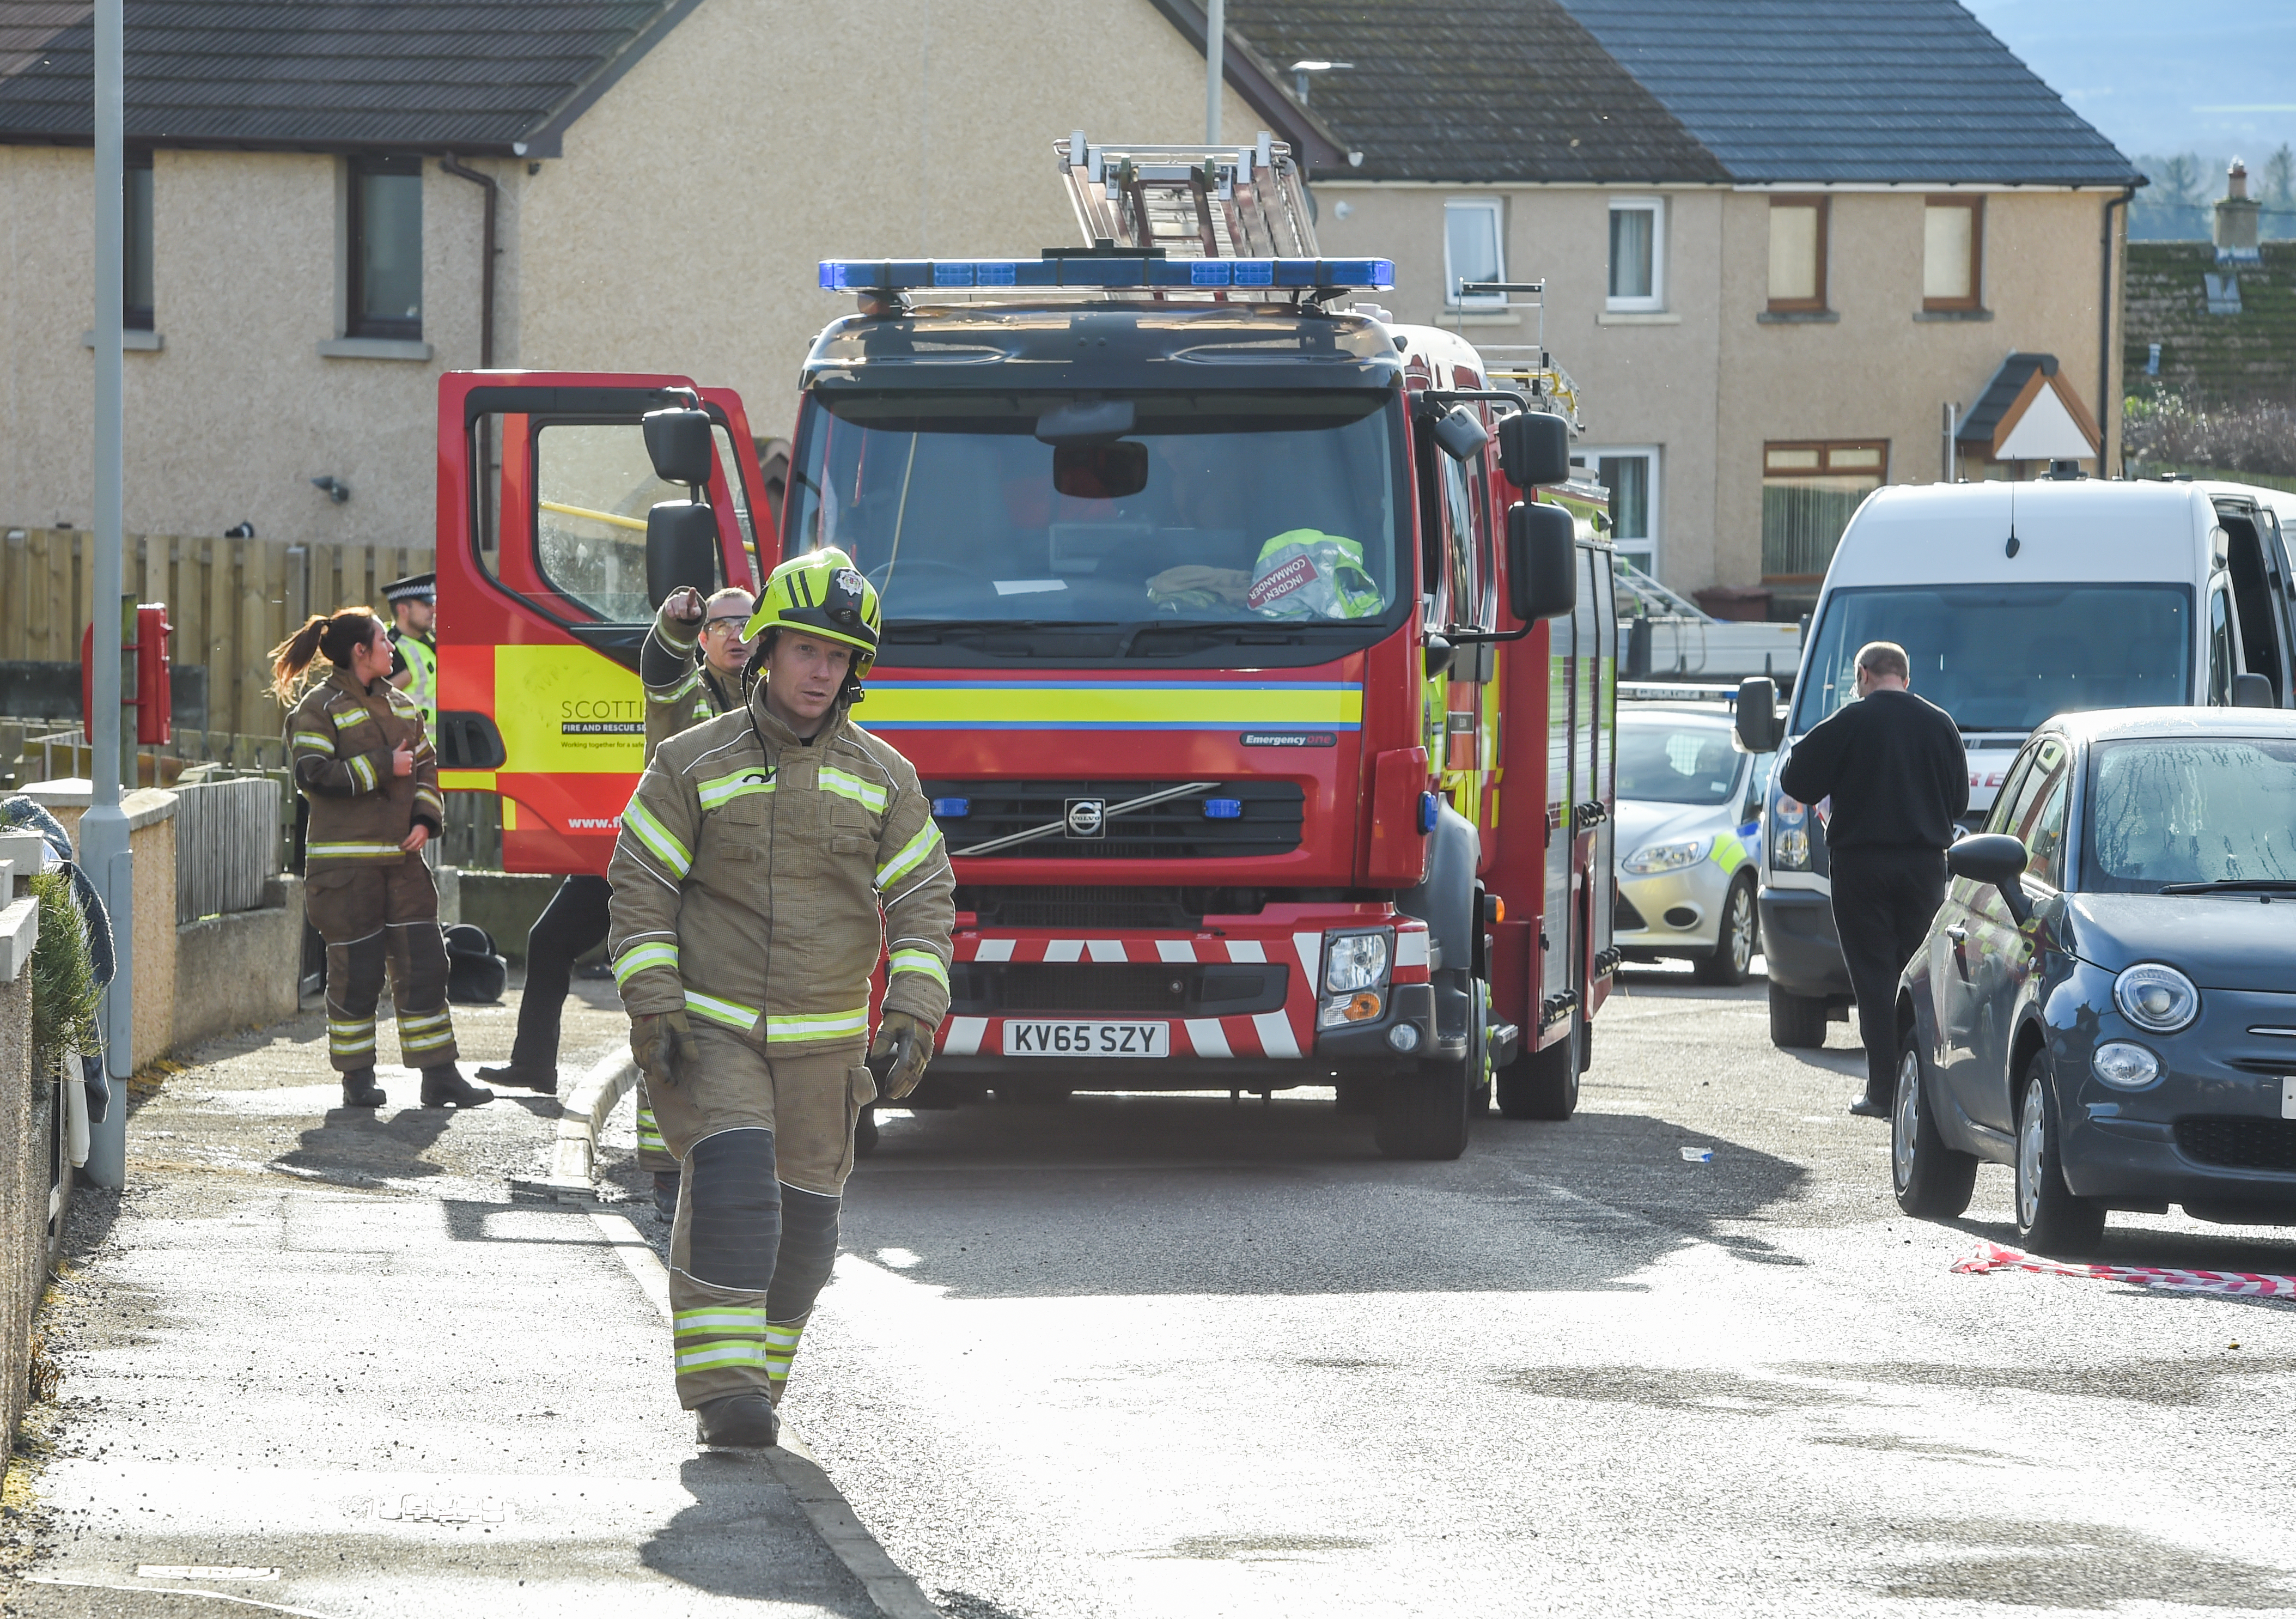 Fire crews at the damaged property in Lossiemouth.